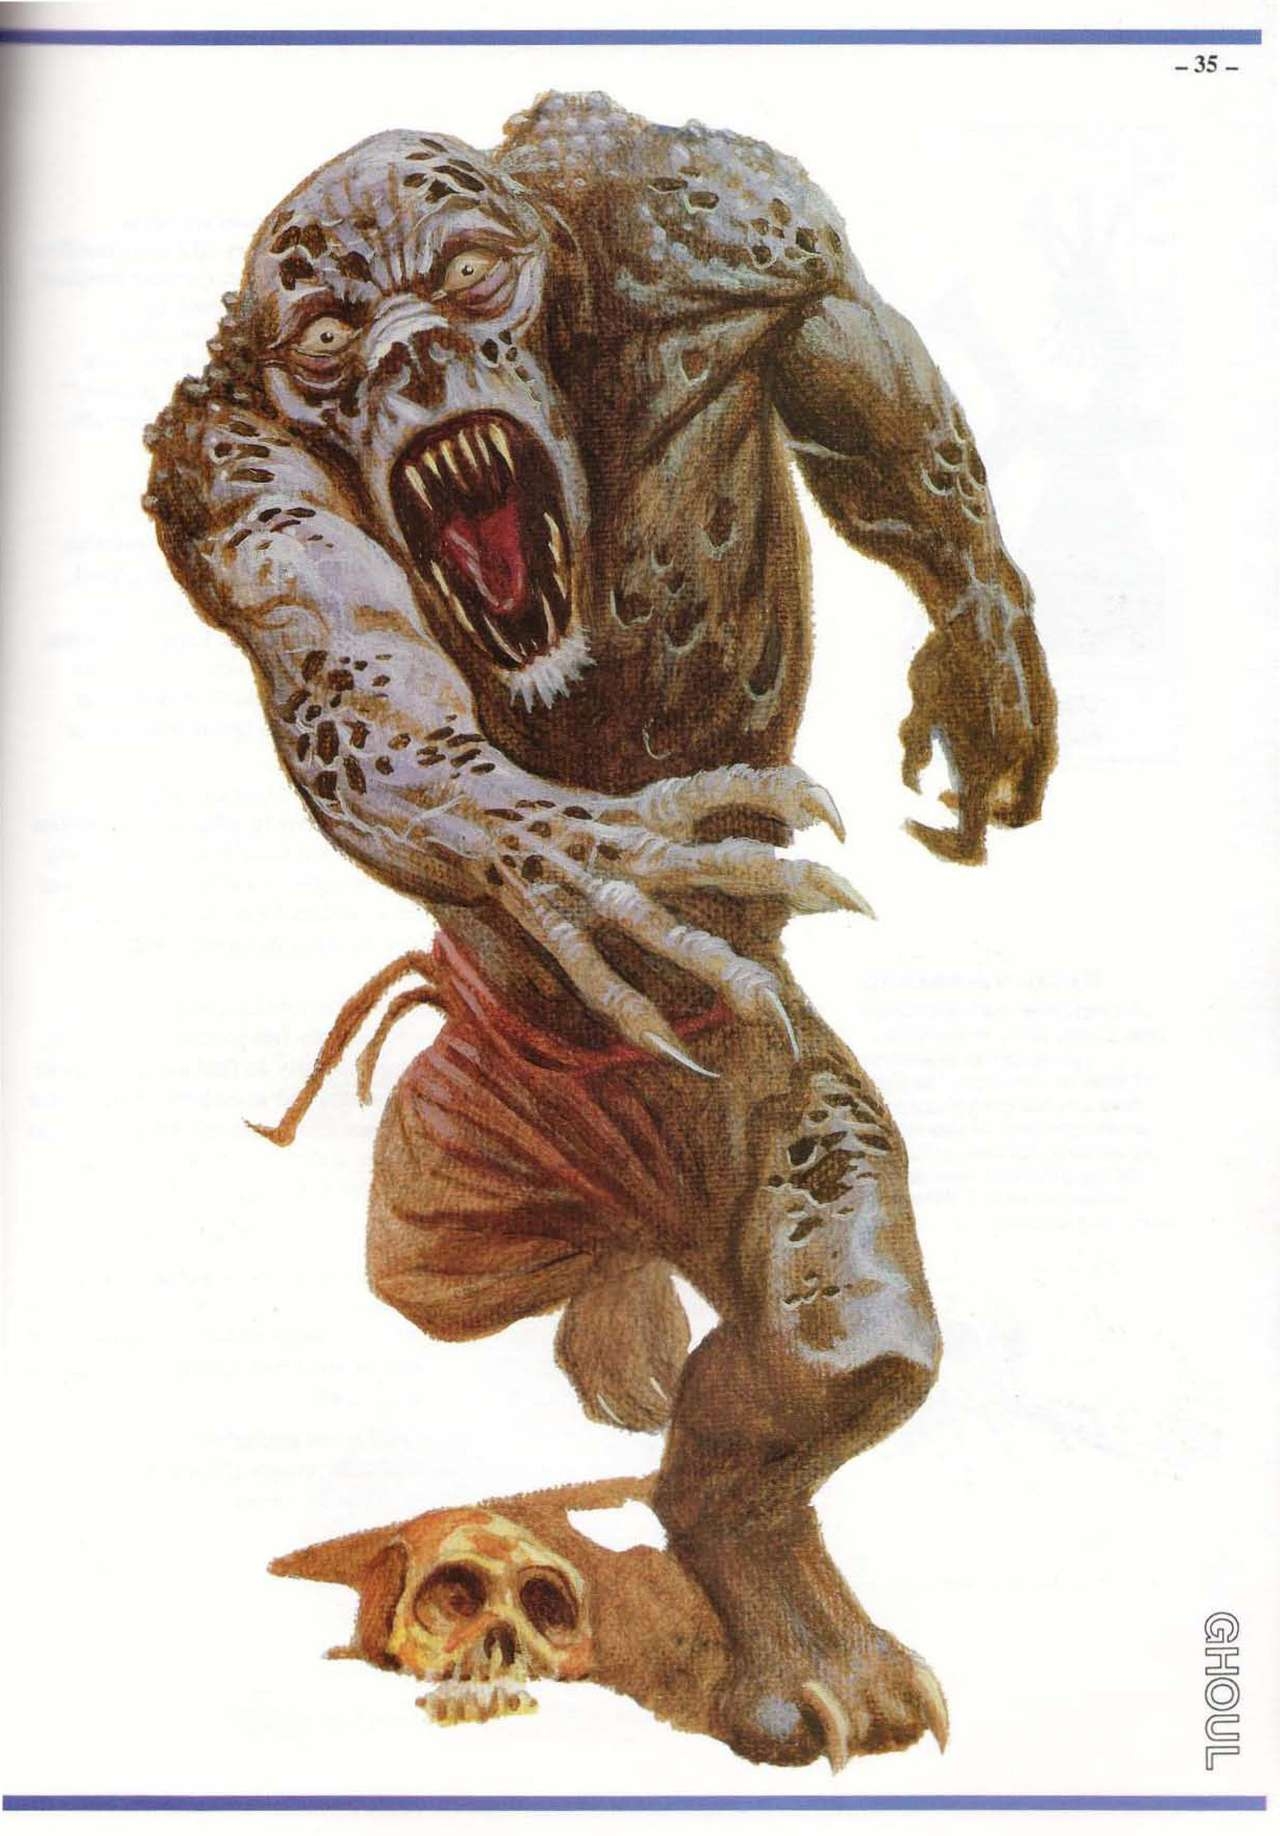 S. Petersen's Field Guide to Cthulhu Monsters 34